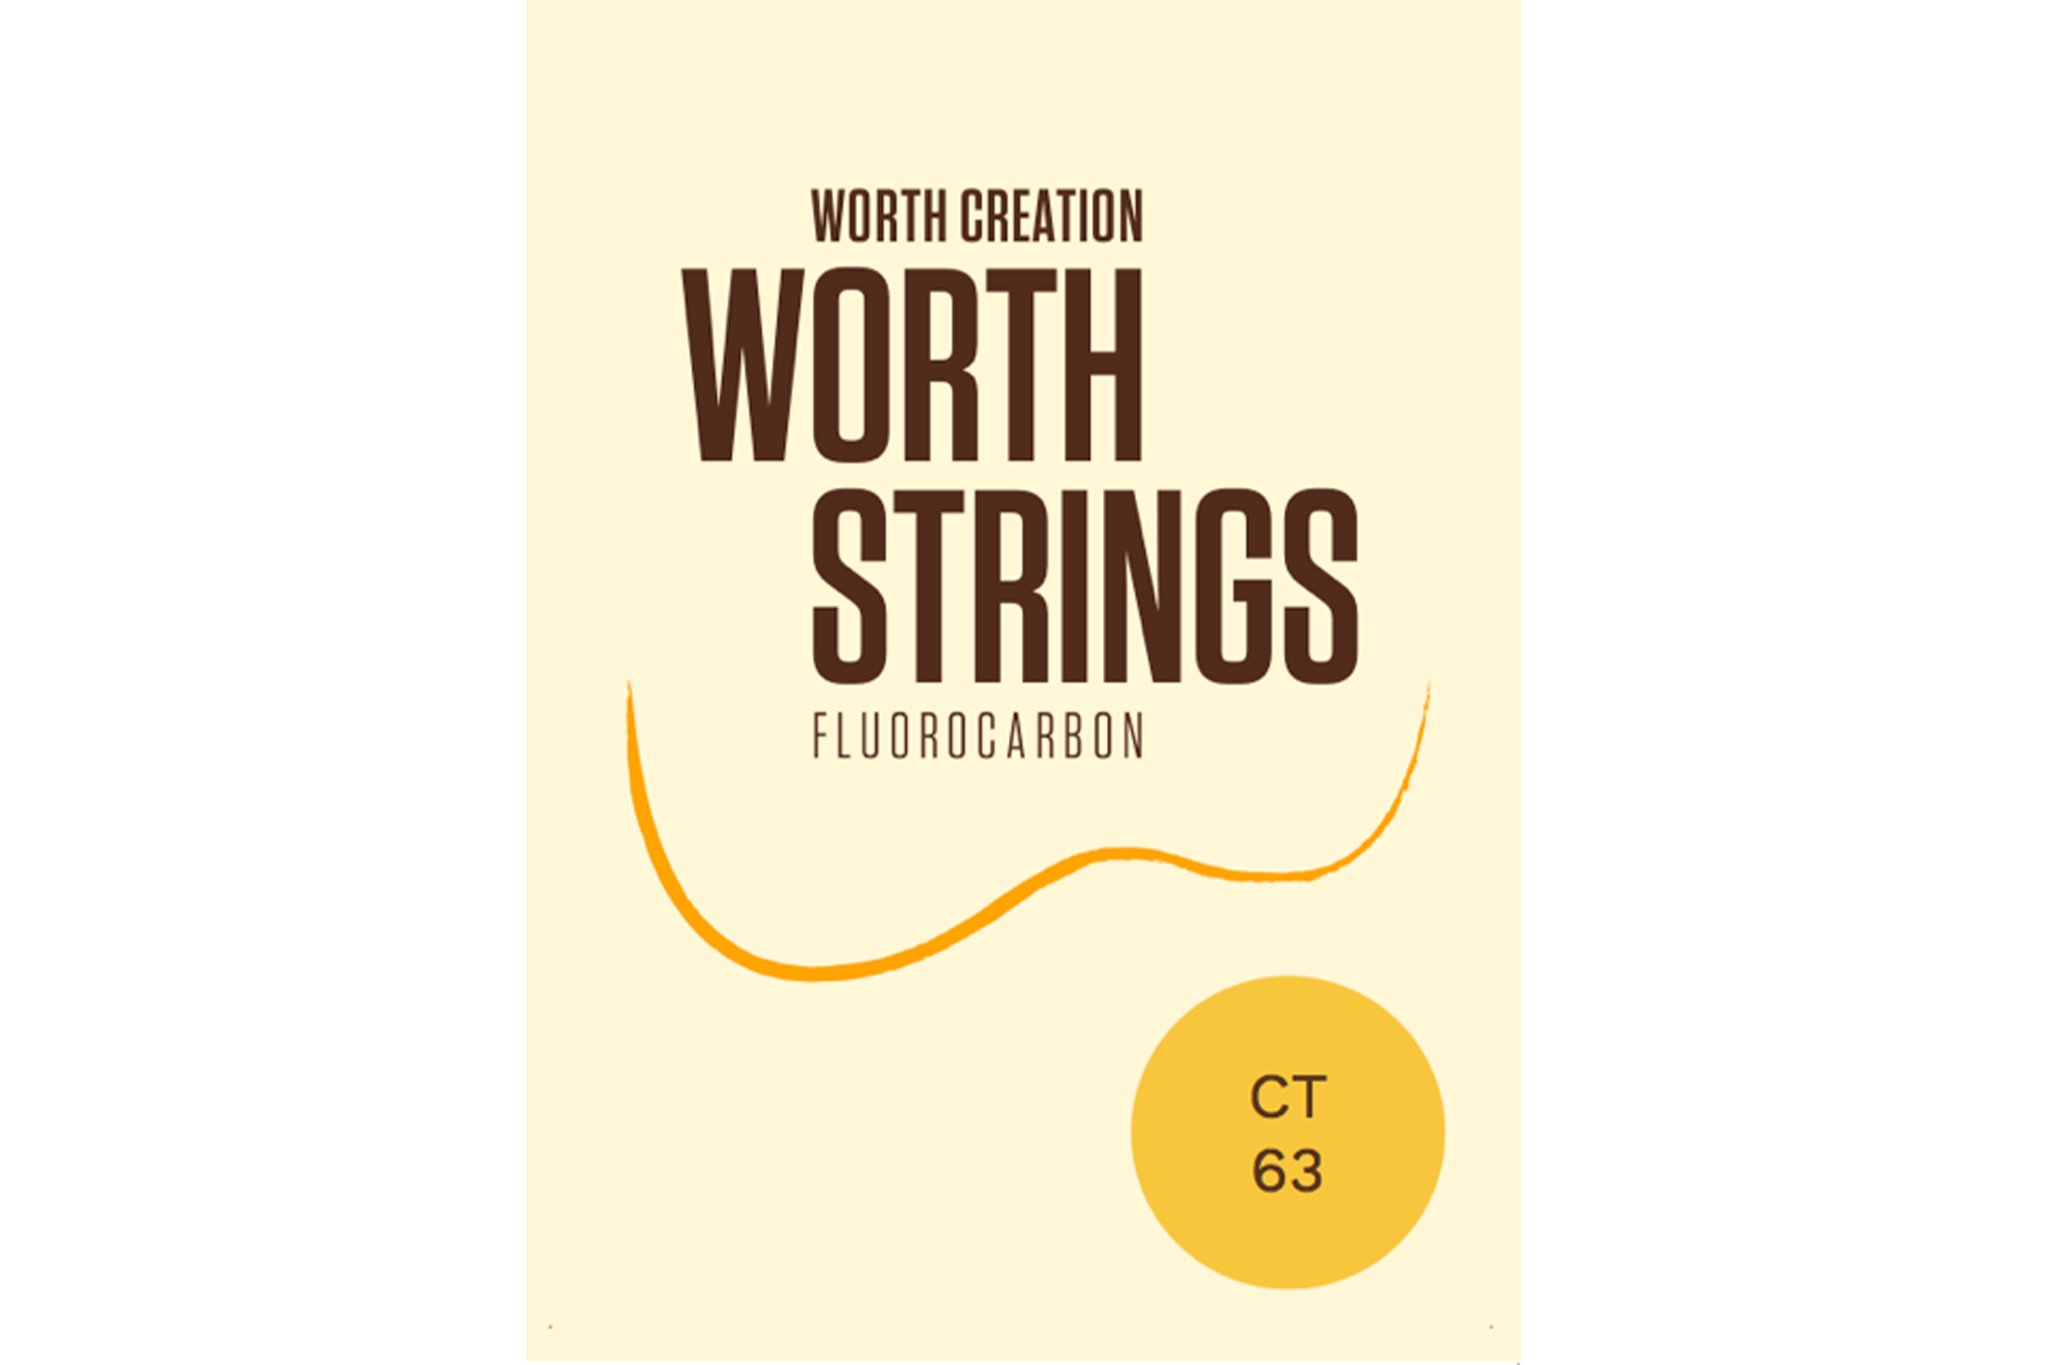 Worth Clear Fluorocarbon Tenor HIGH G Ukulele Strings CT 63 inch (G-C-E-A) Enough For 2 Sets